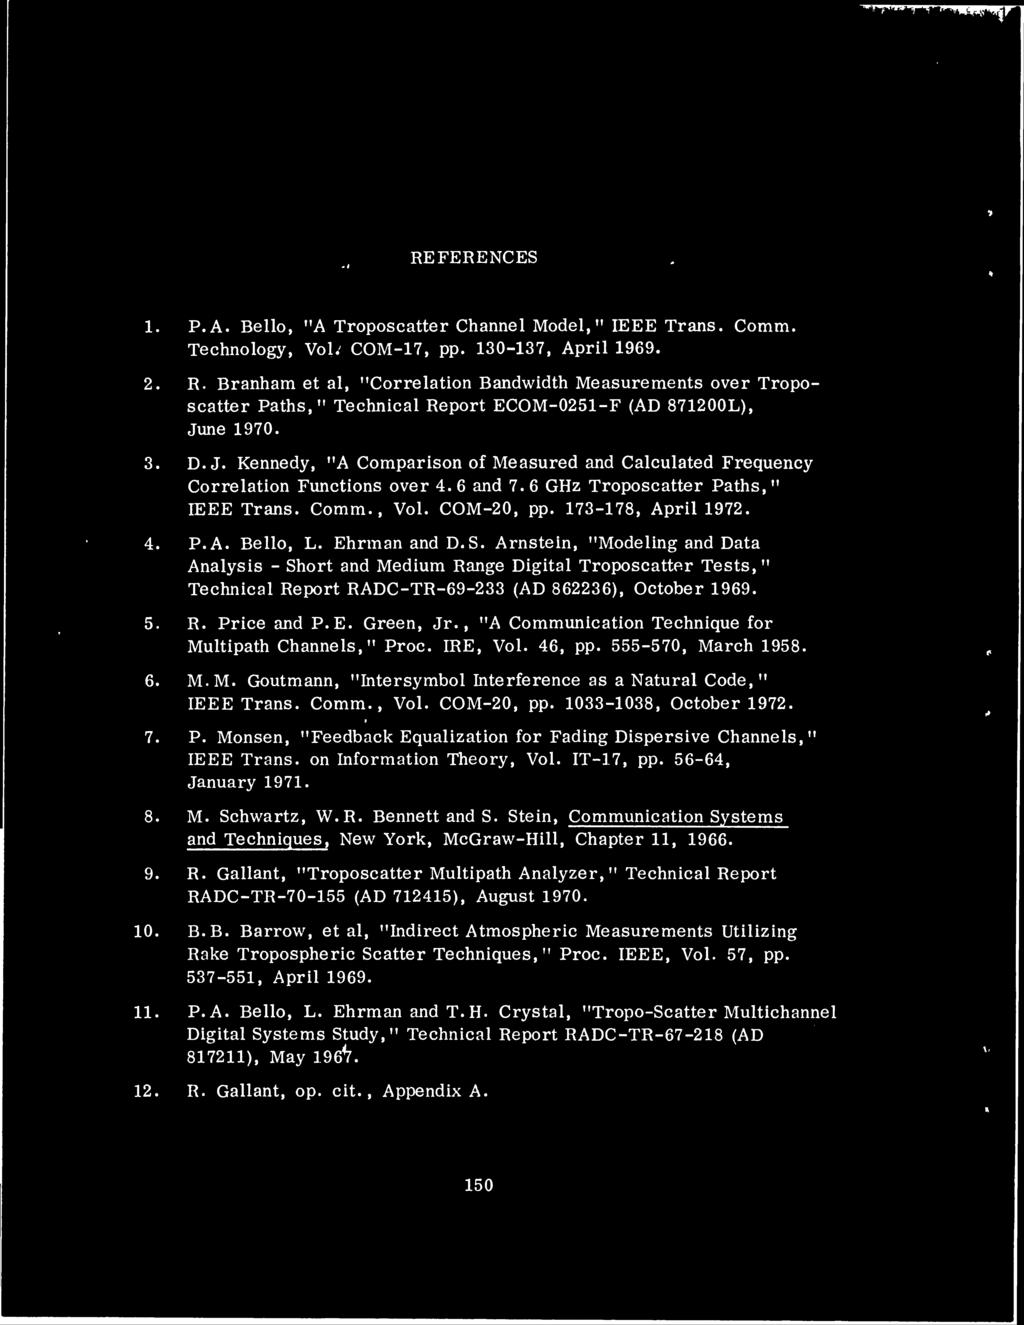 ne 1970. 3. D. J. Kennedy, "A Comparison of Measured and Calculated Frequency Correlation Functions over 4. 6 and 7. 6 GHz Troposcatter Paths," IEEE Trans. Comm., Vol. COM-20, pp. 173-178, April 1972.